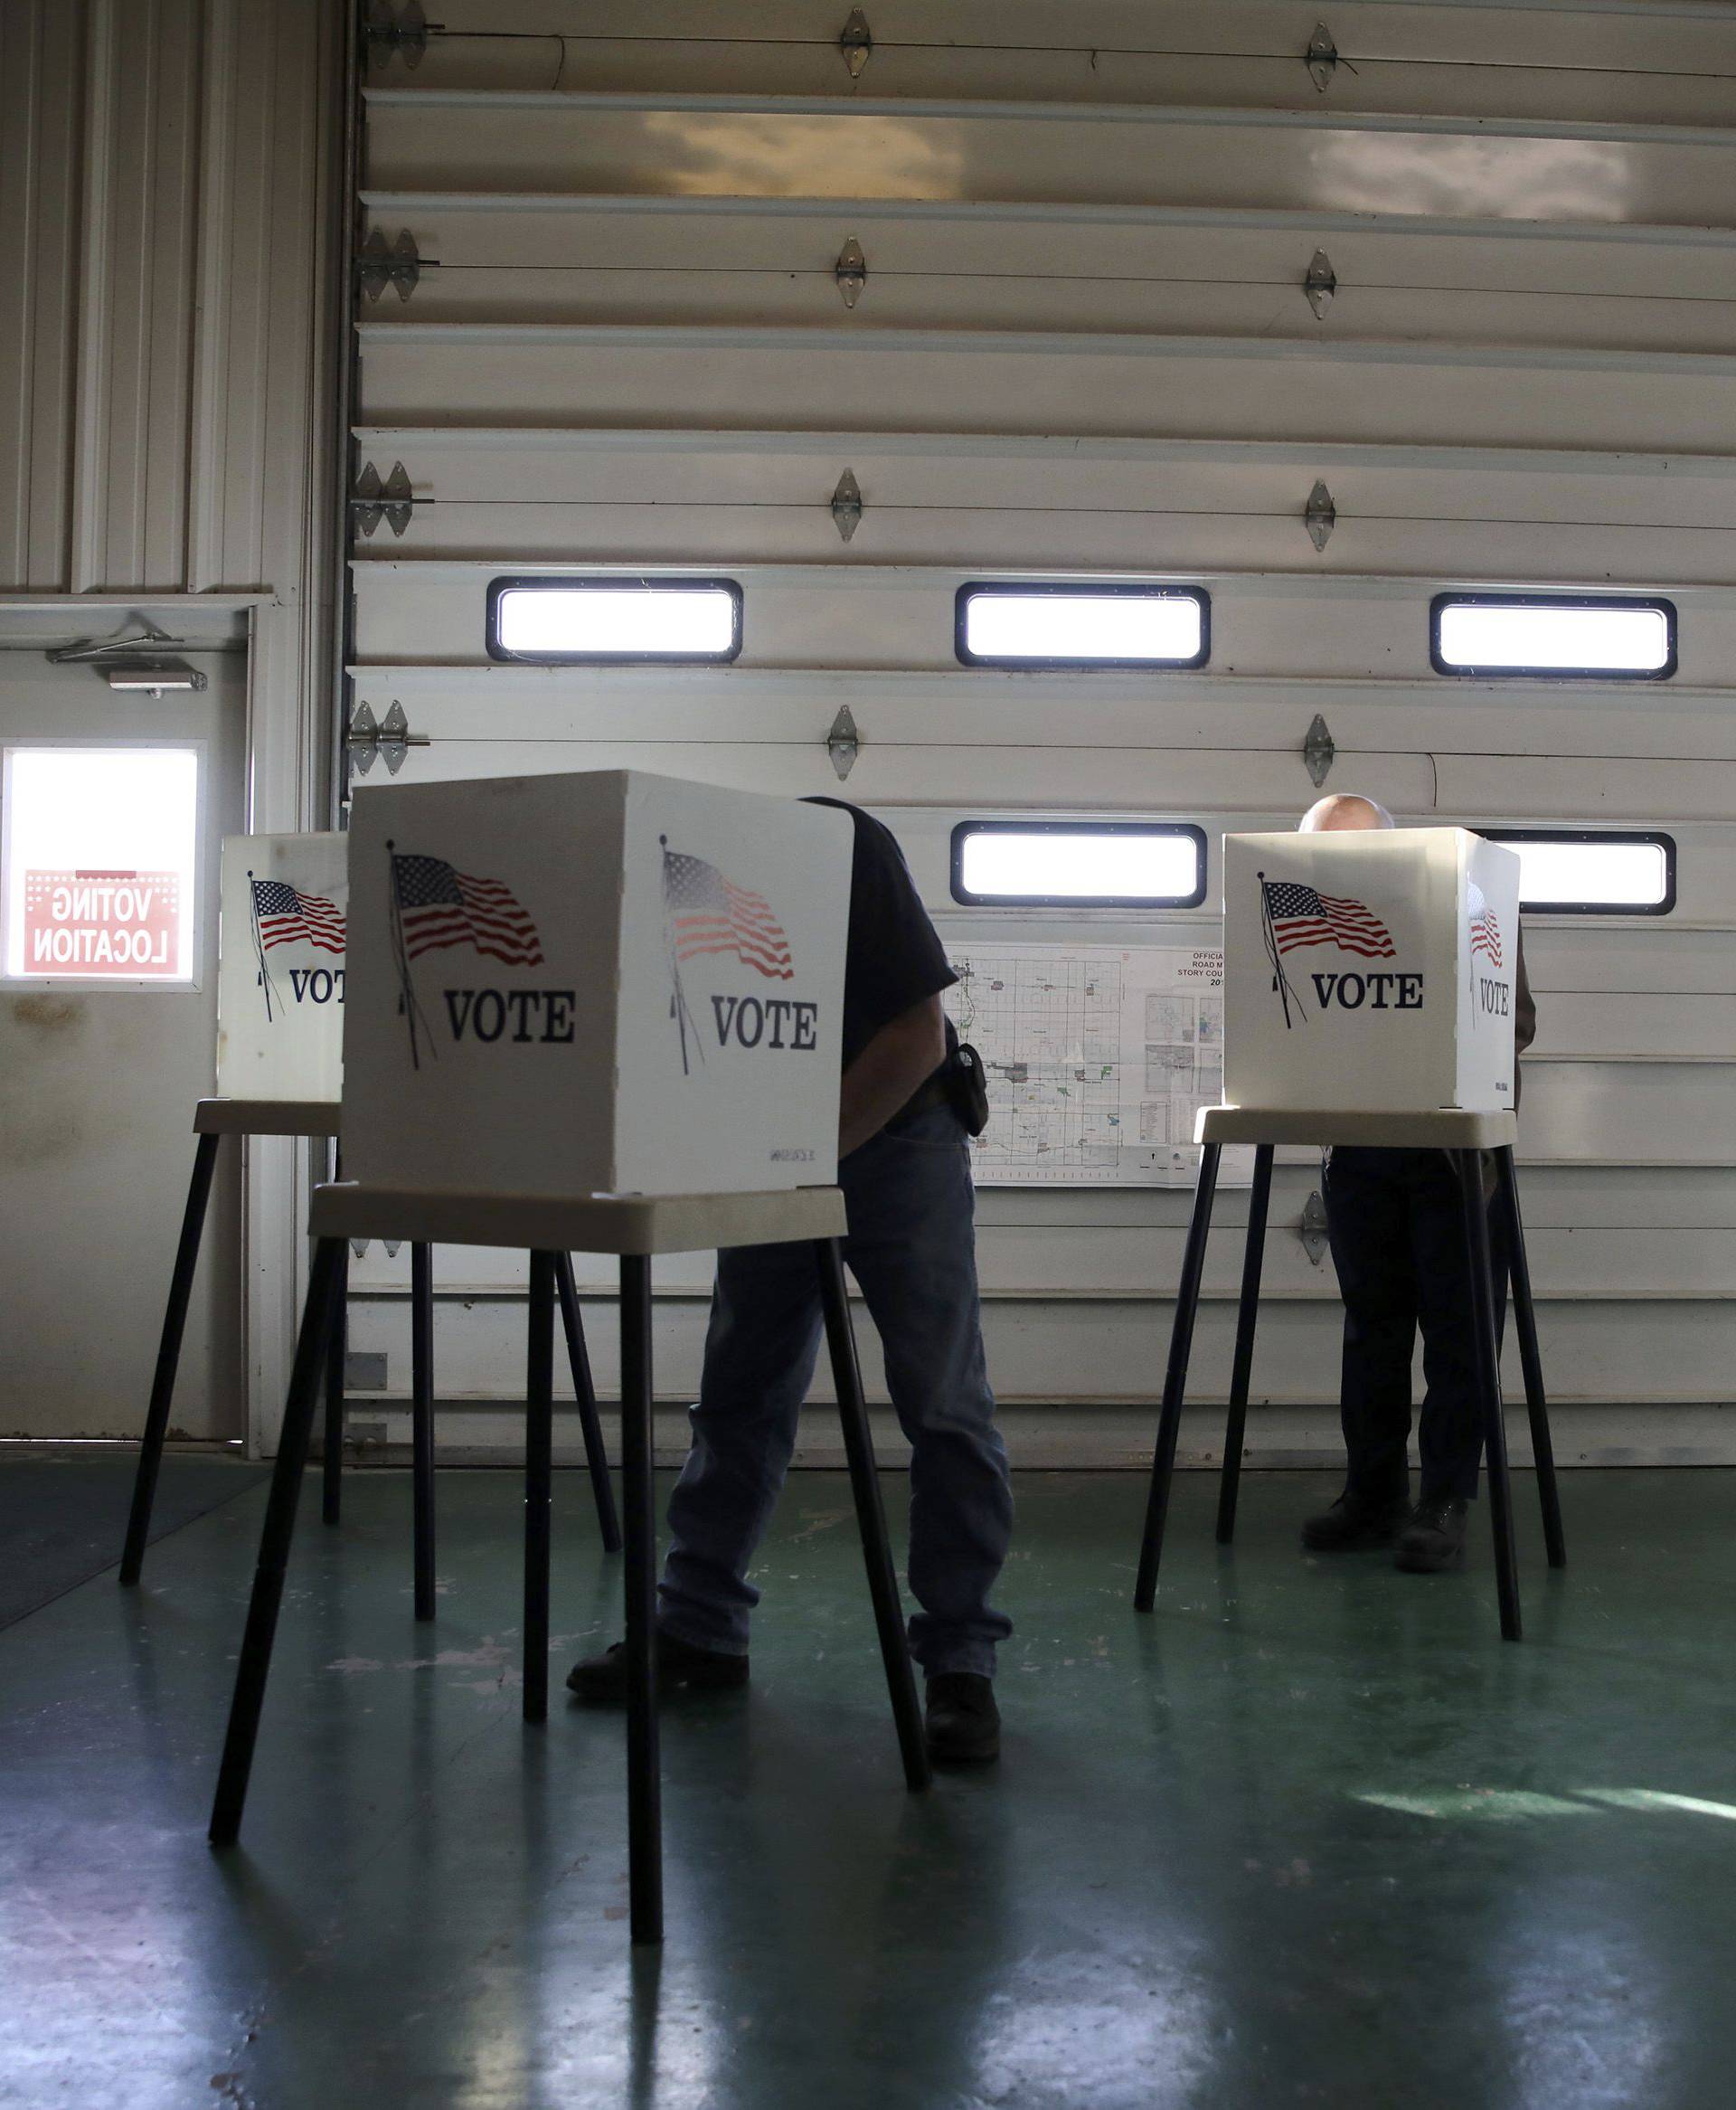 Voters cast ballots in polling station located in a farm shed during the U.S. presidential election near Nevada, Iowa